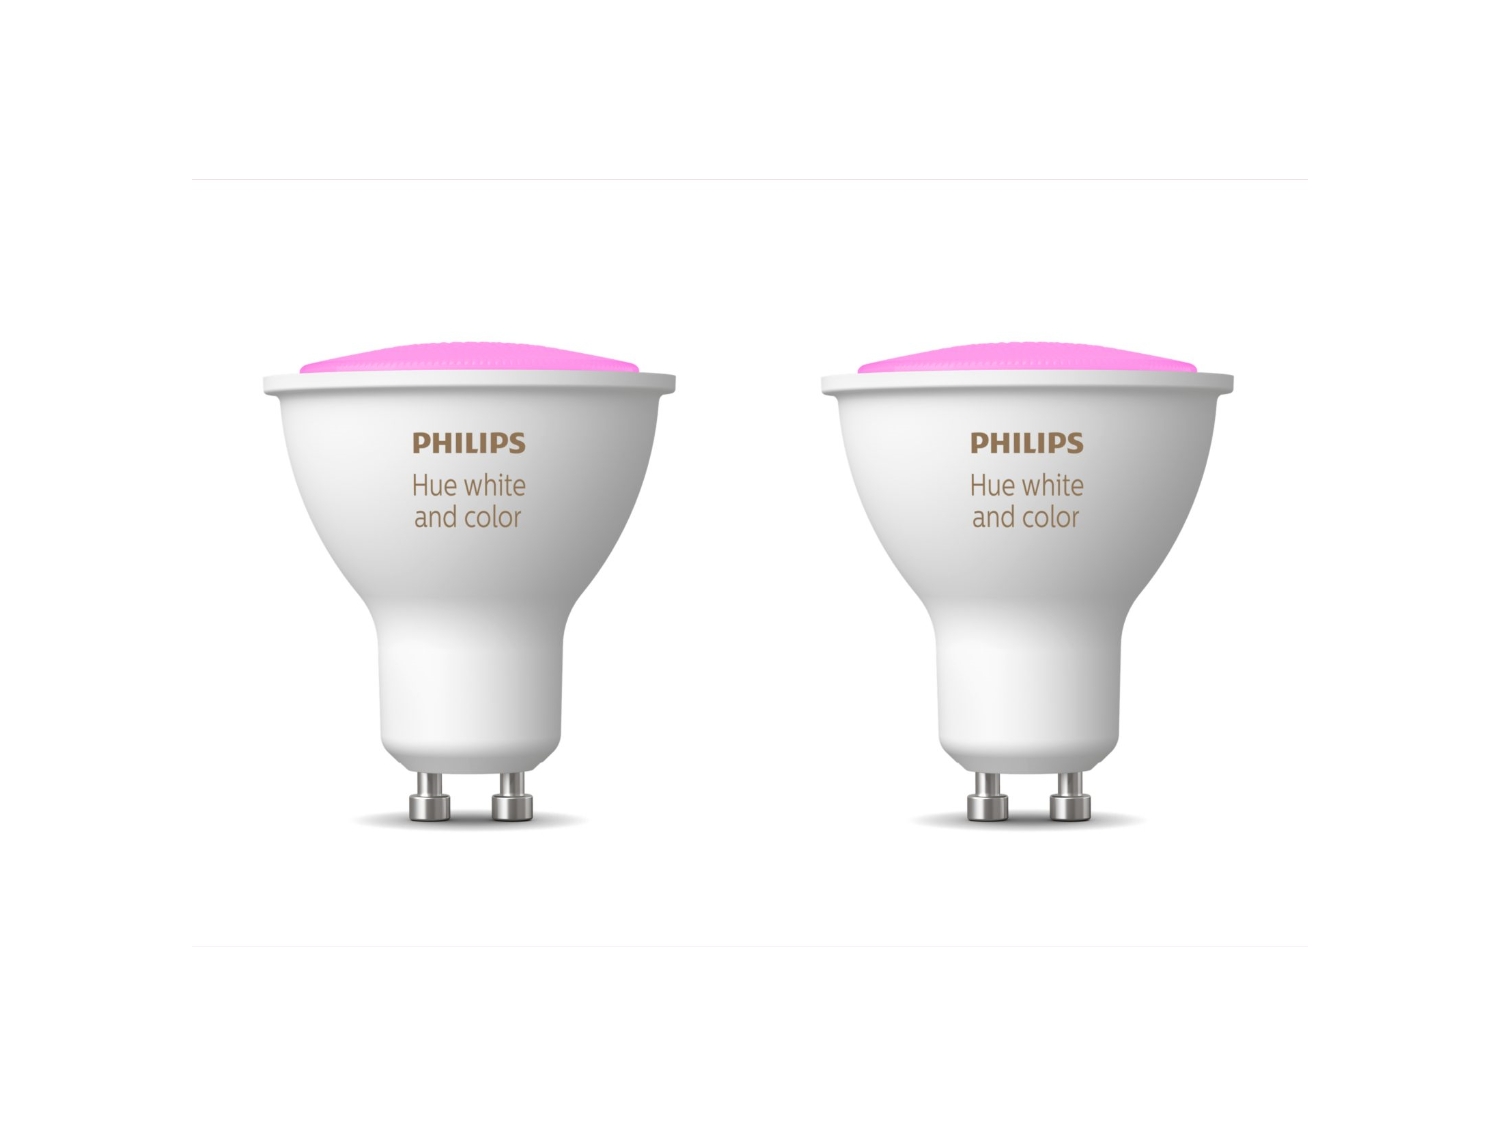 Philips Hue GU10 (2-pack) Color Ambiance featured